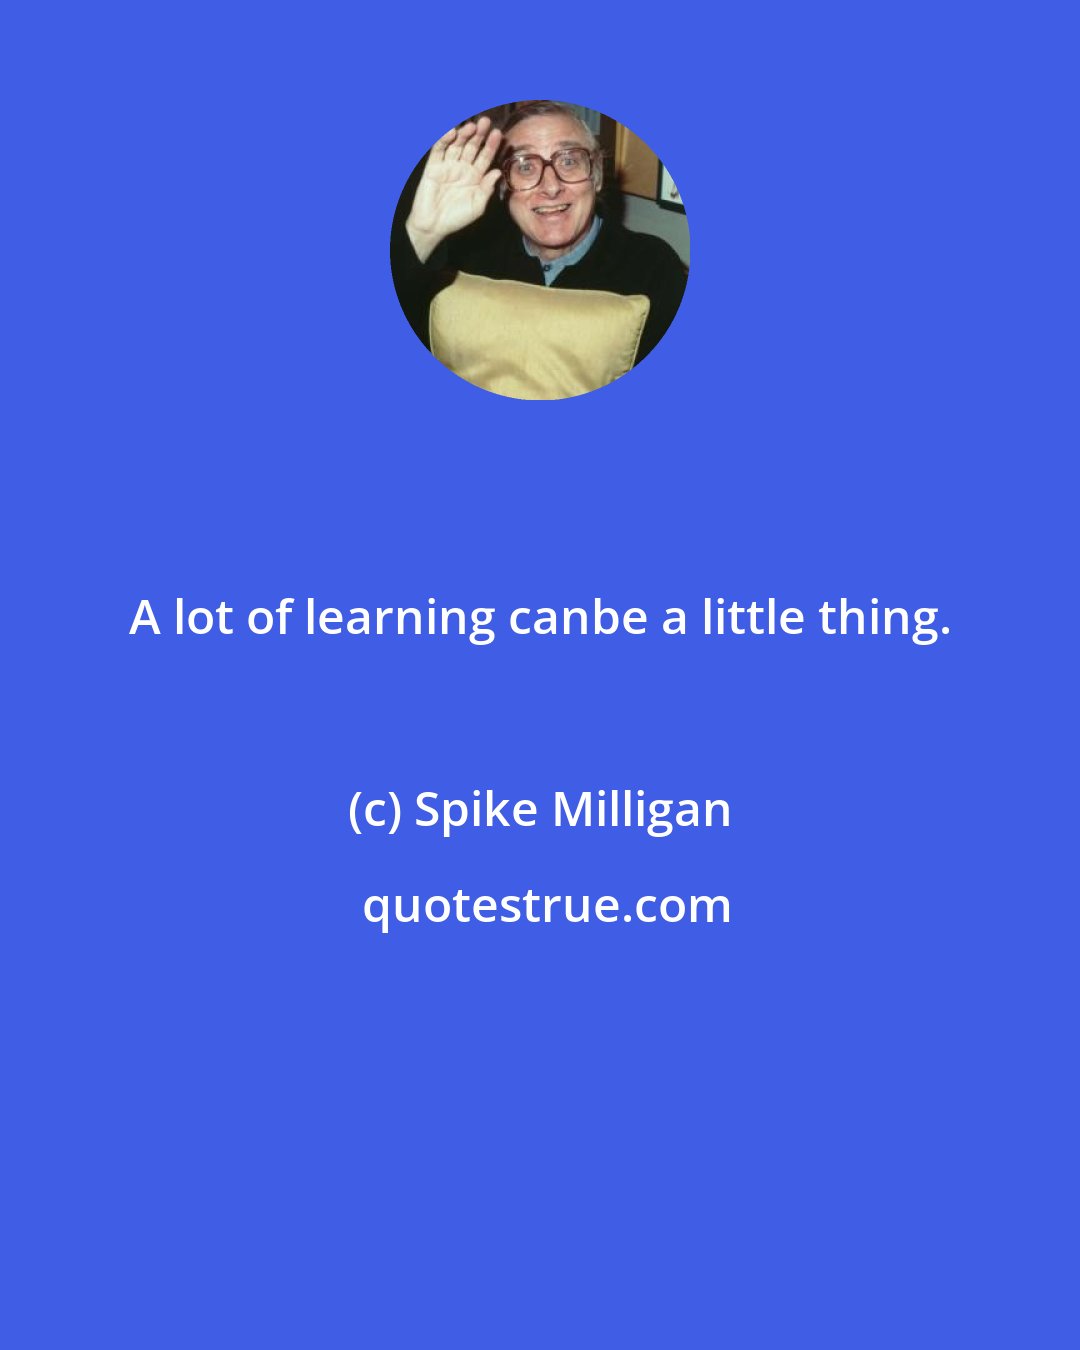 Spike Milligan: A lot of learning canbe a little thing.